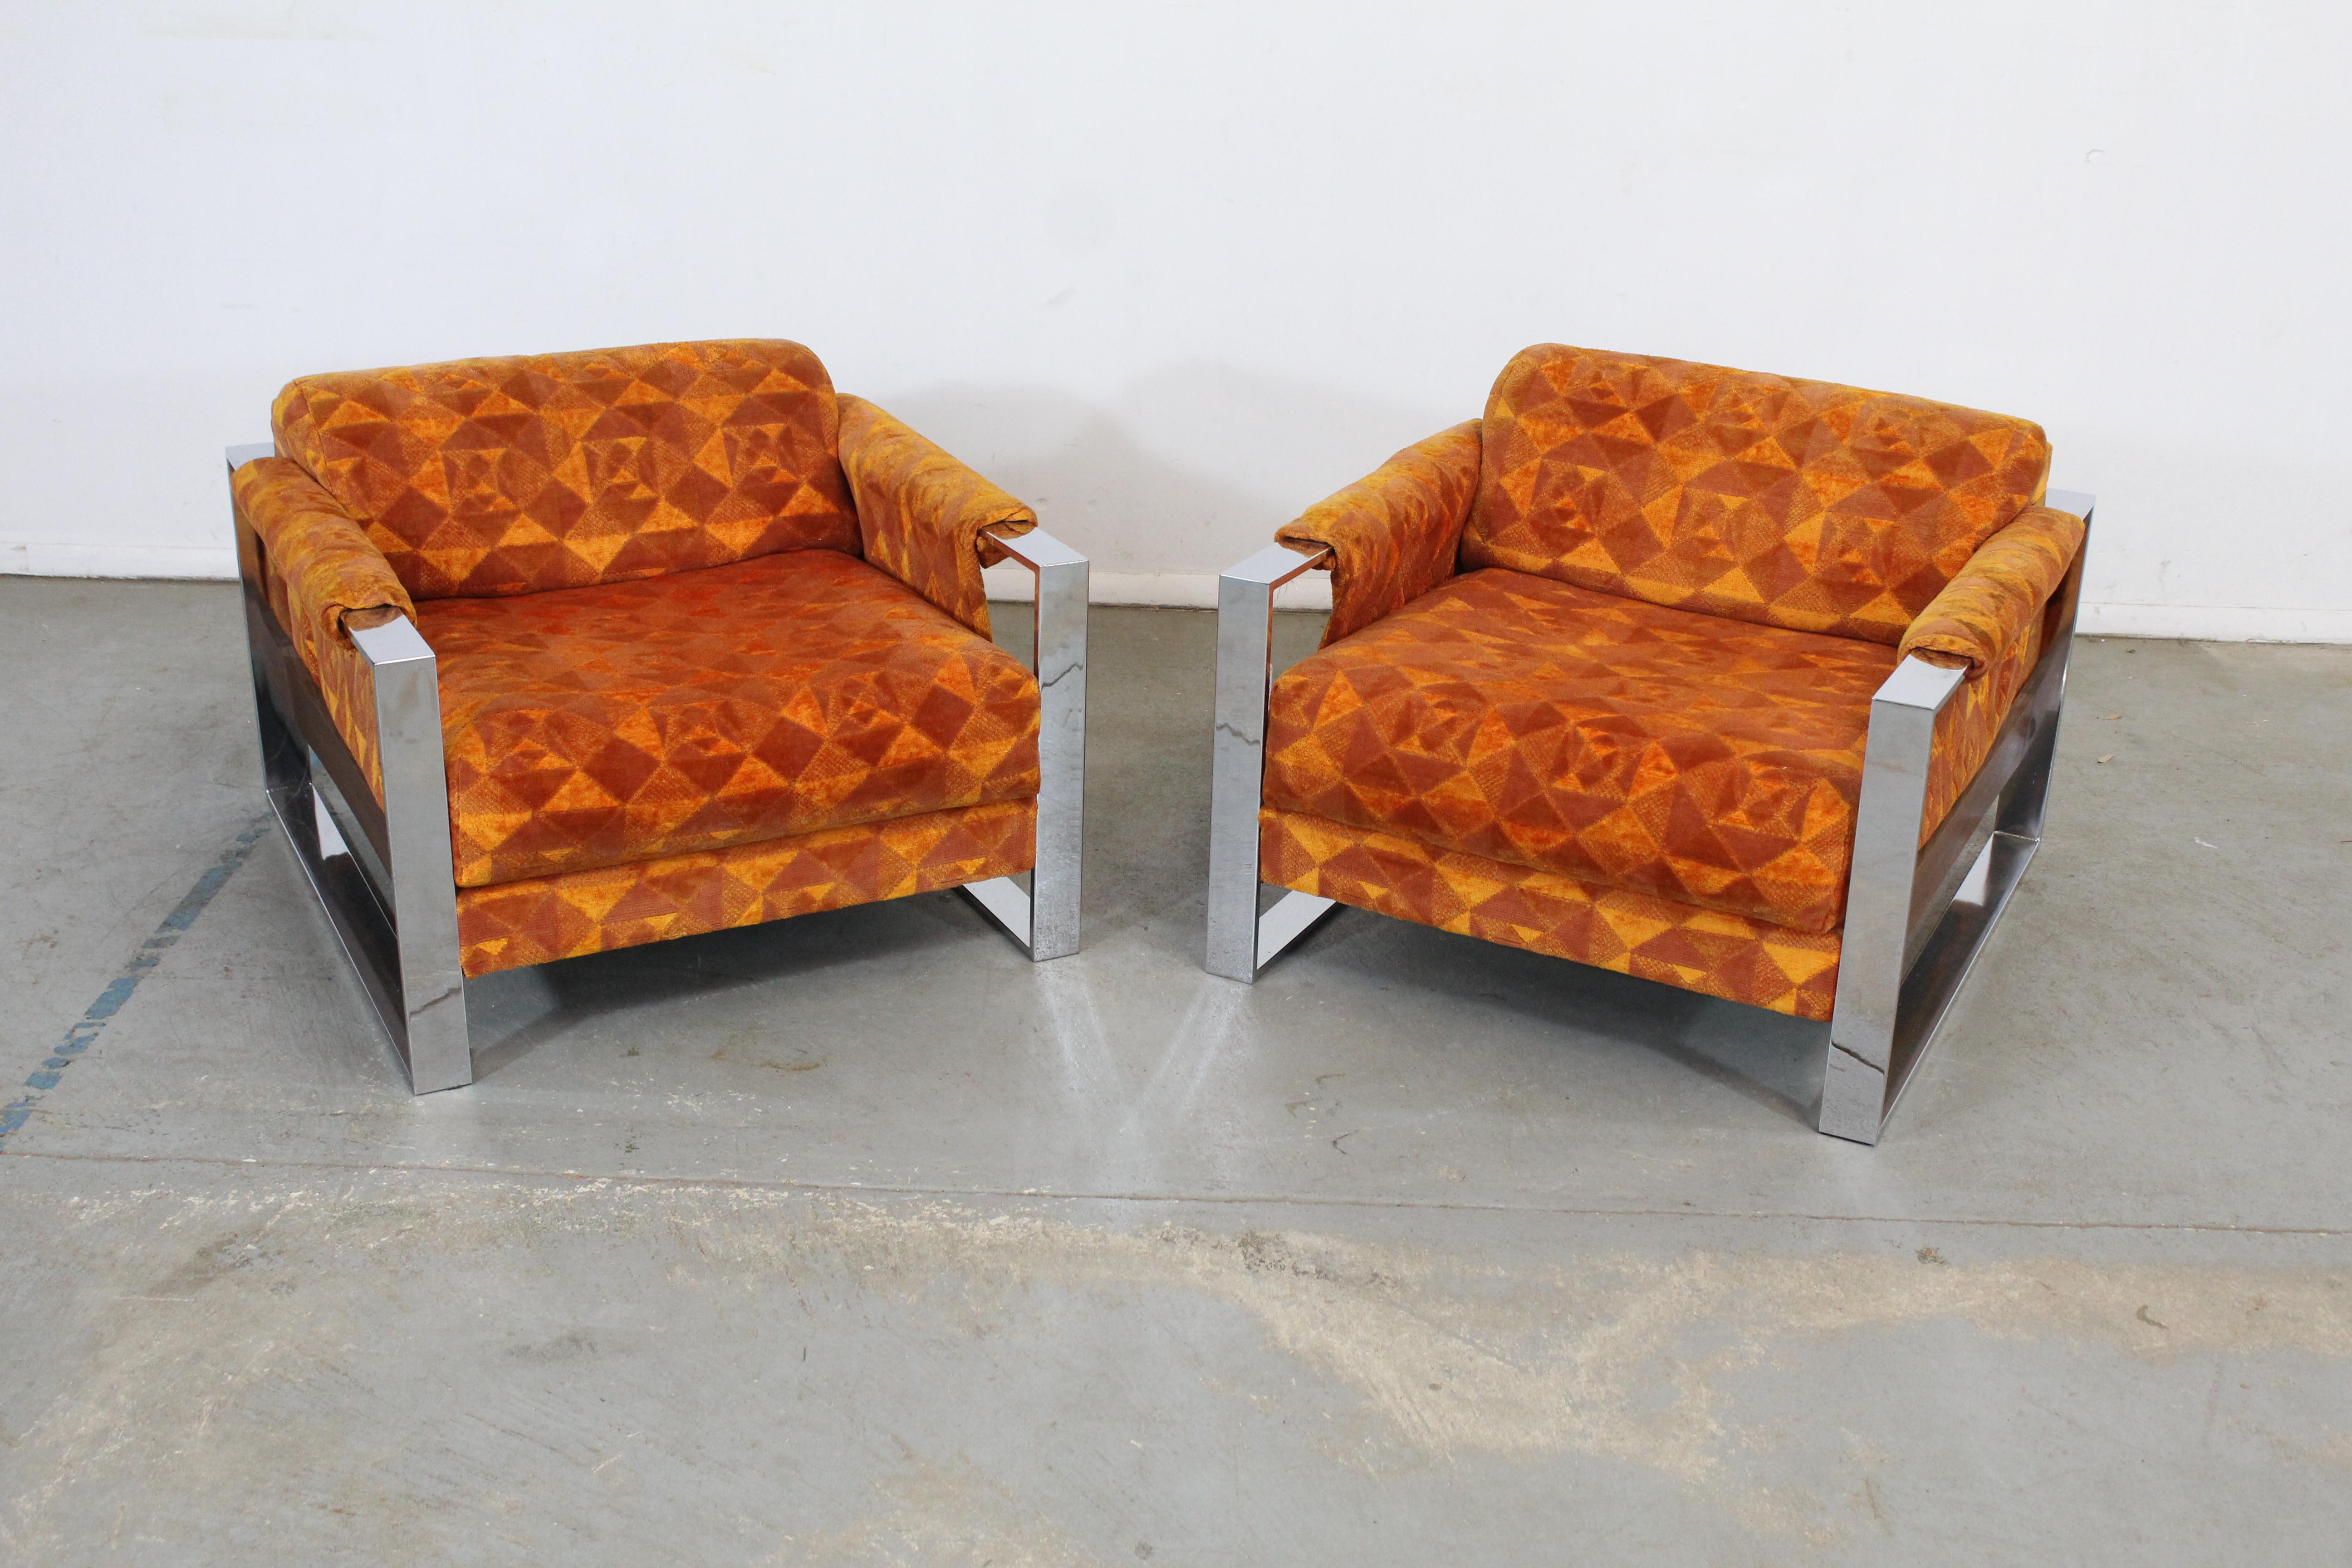 Offered is a rare pair of Mid-Century Modern adrian pearsall craft associates chrome lounge chairs. These chairs feature geometric orange upholstery and chrome bases. They are in excellent condition, showing minor age wear (upholstery in good